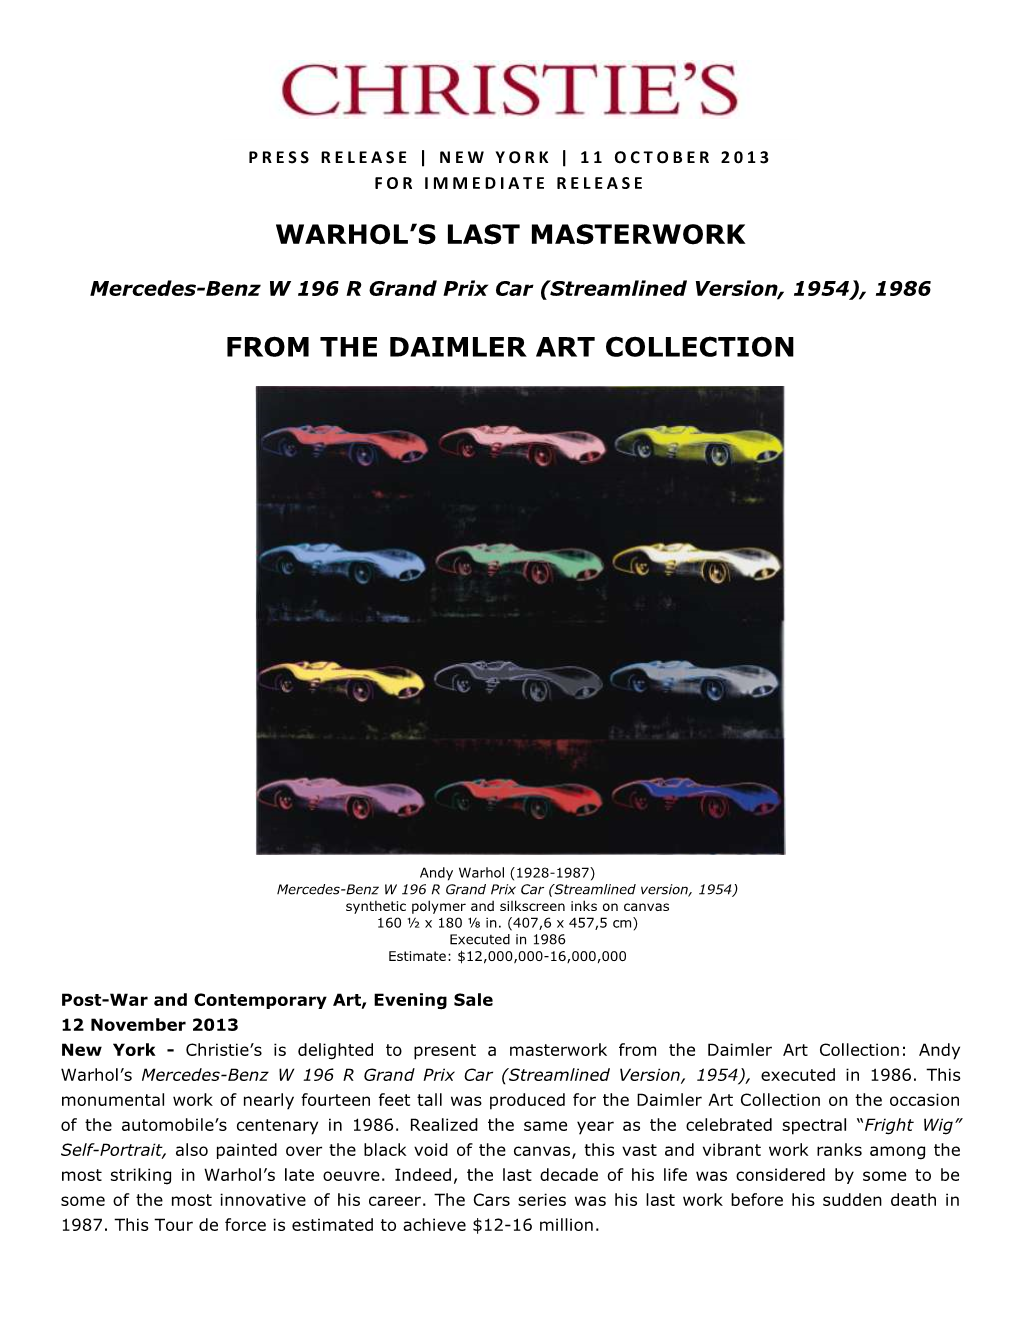 Warhol's Last Masterwork from the Daimler Art Collection